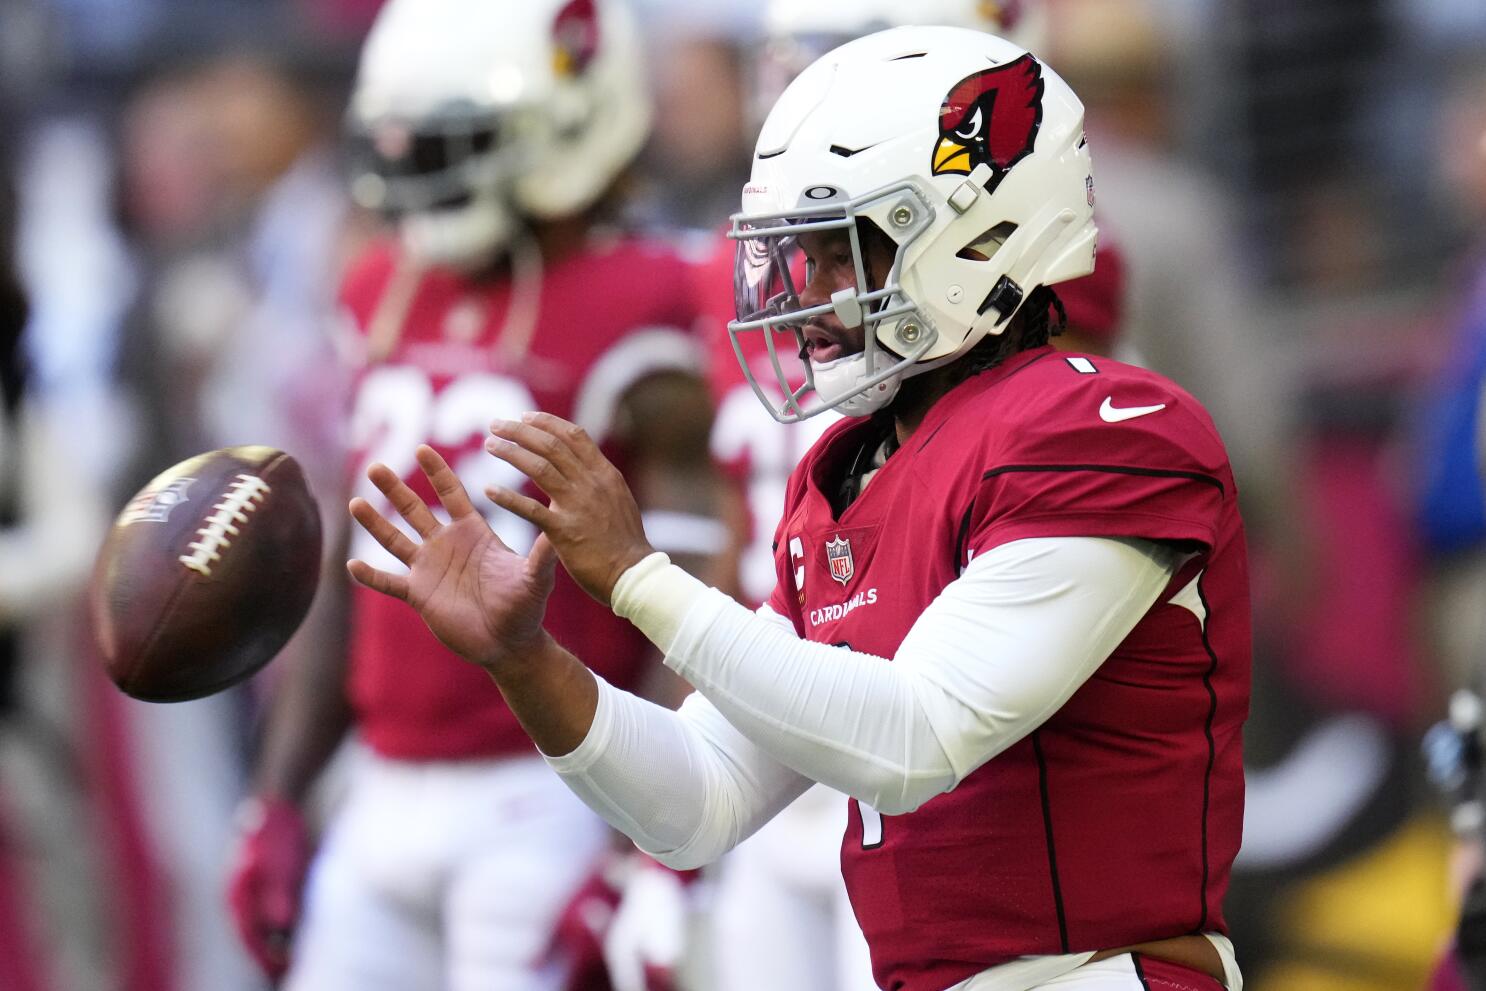 Who has the edge: Arizona Cardinals or San Diego Chargers?